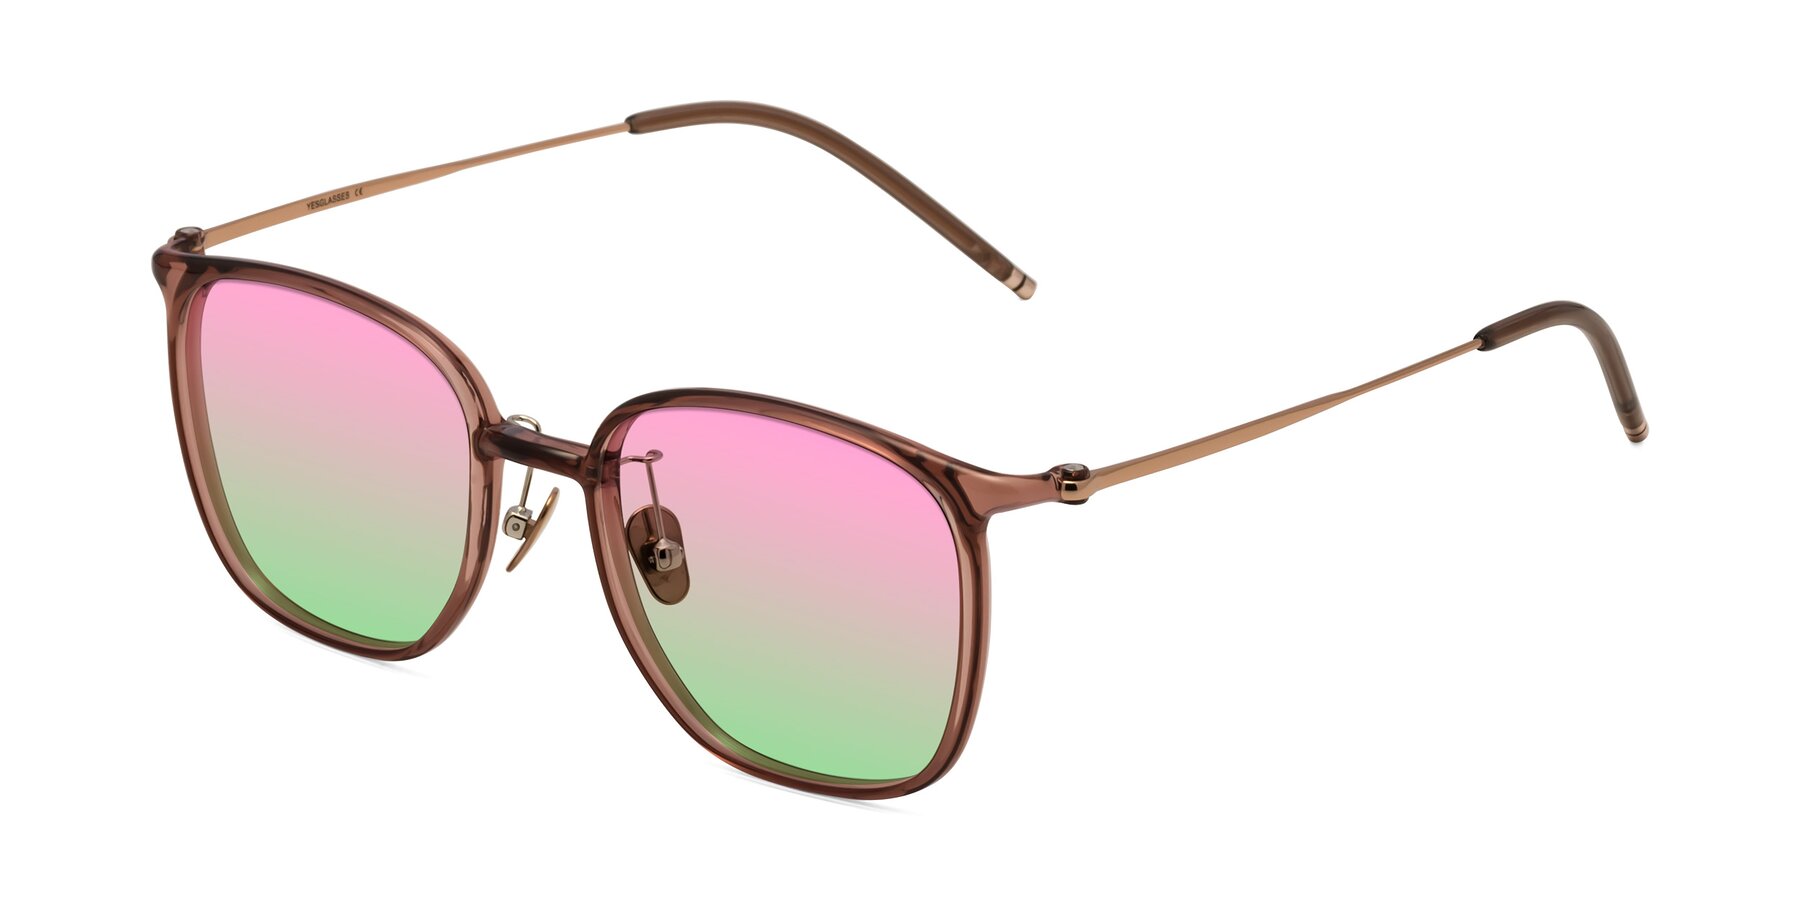 Angle of Manlius in Redwood with Pink / Green Gradient Lenses